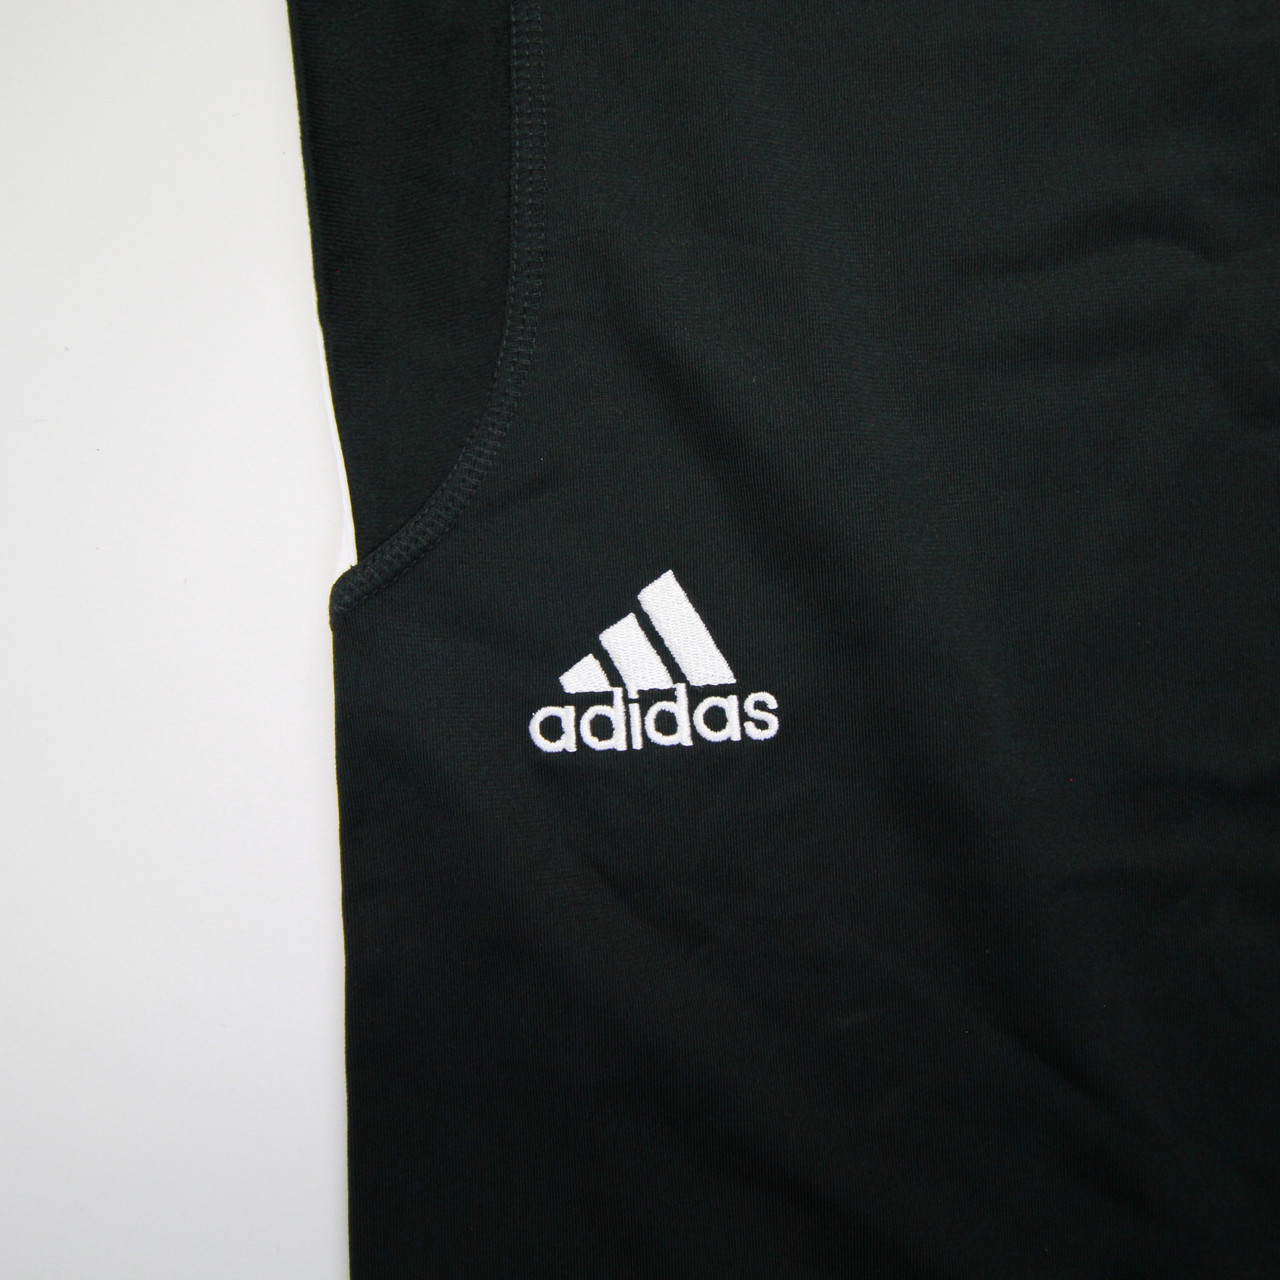 adidas Climalite Athletic Pants Women's Black/White "New without Tags" S -  Locker Room Direct